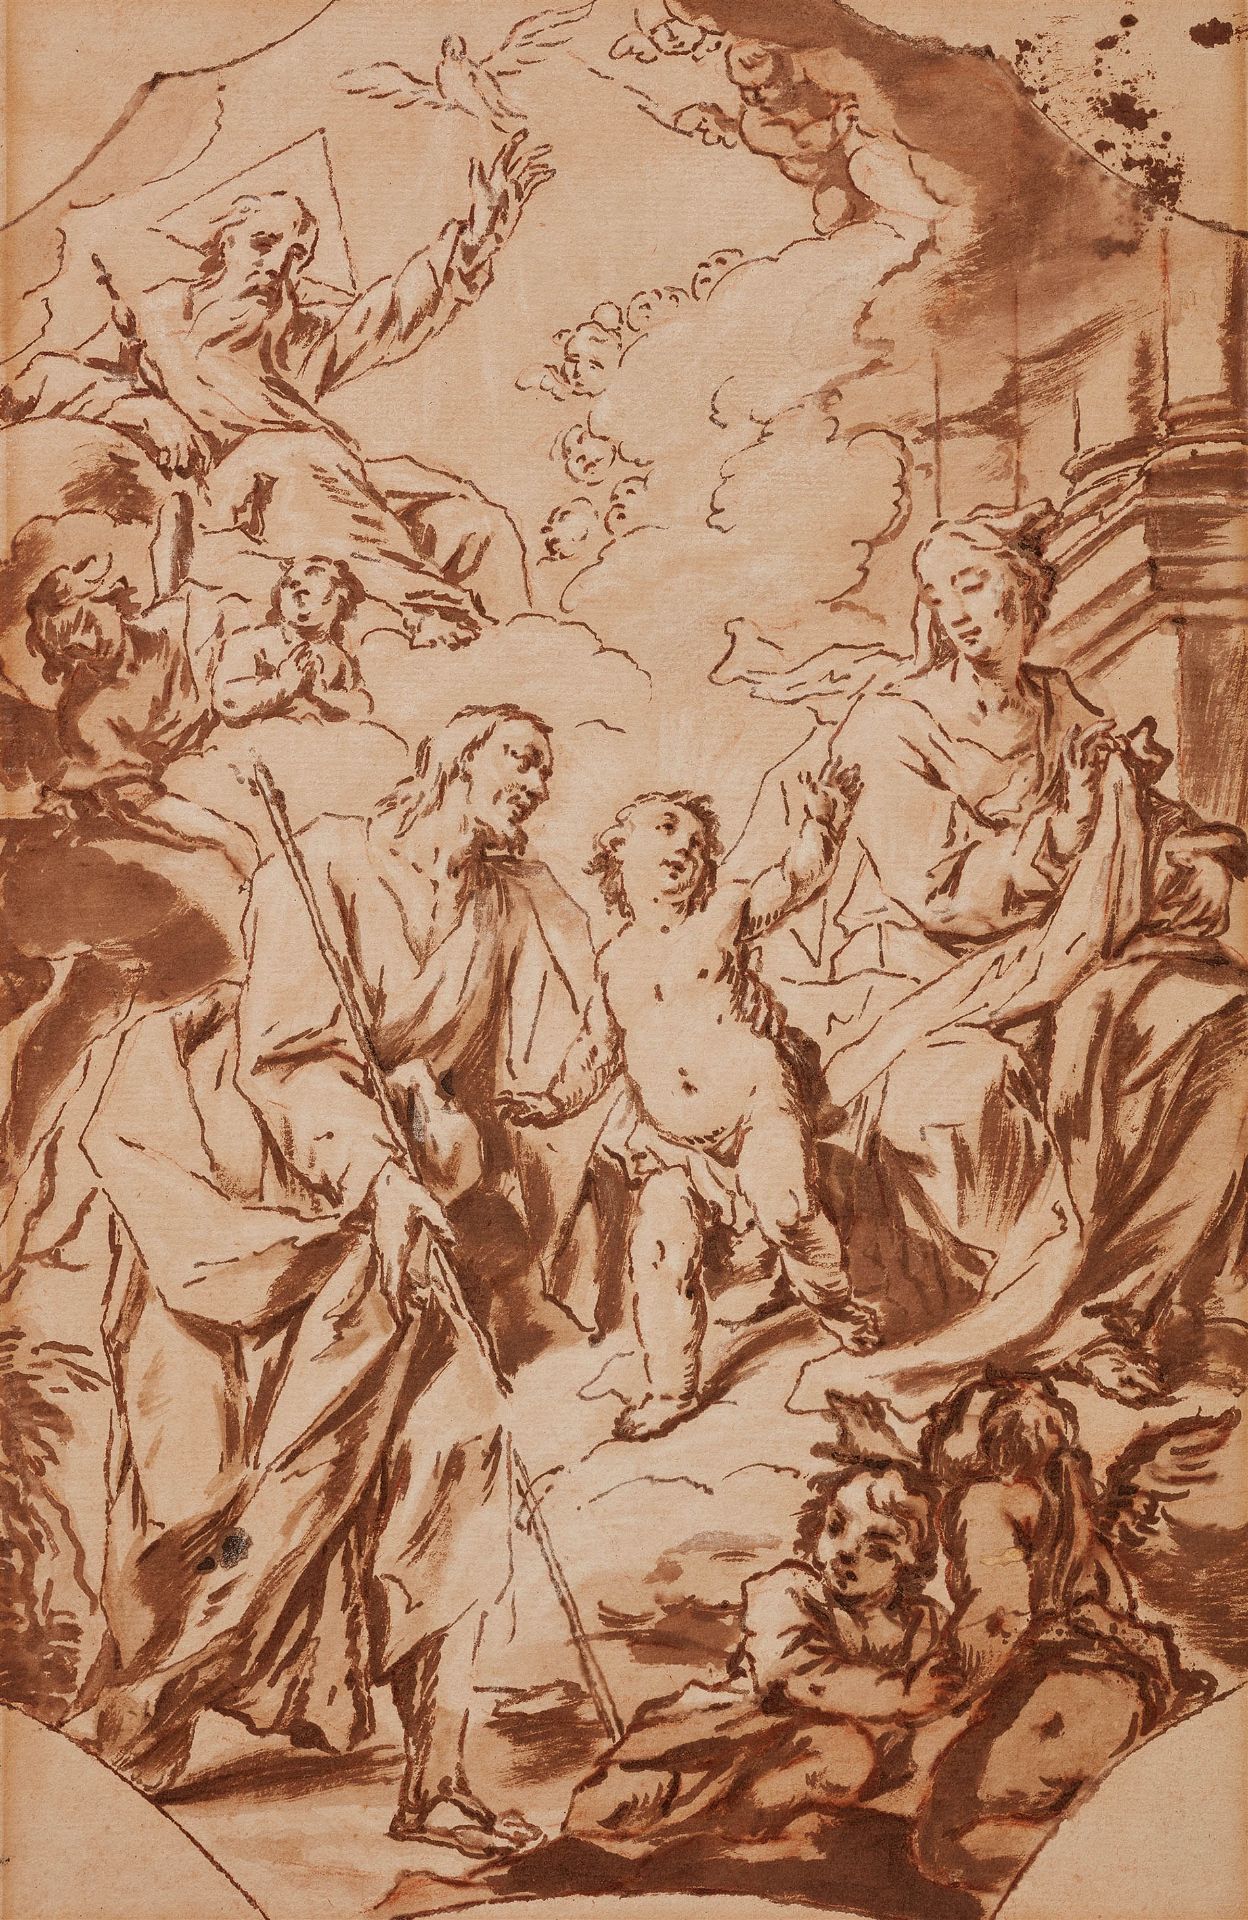 Venetian School 18th century, Altarpiece design with Holy Family